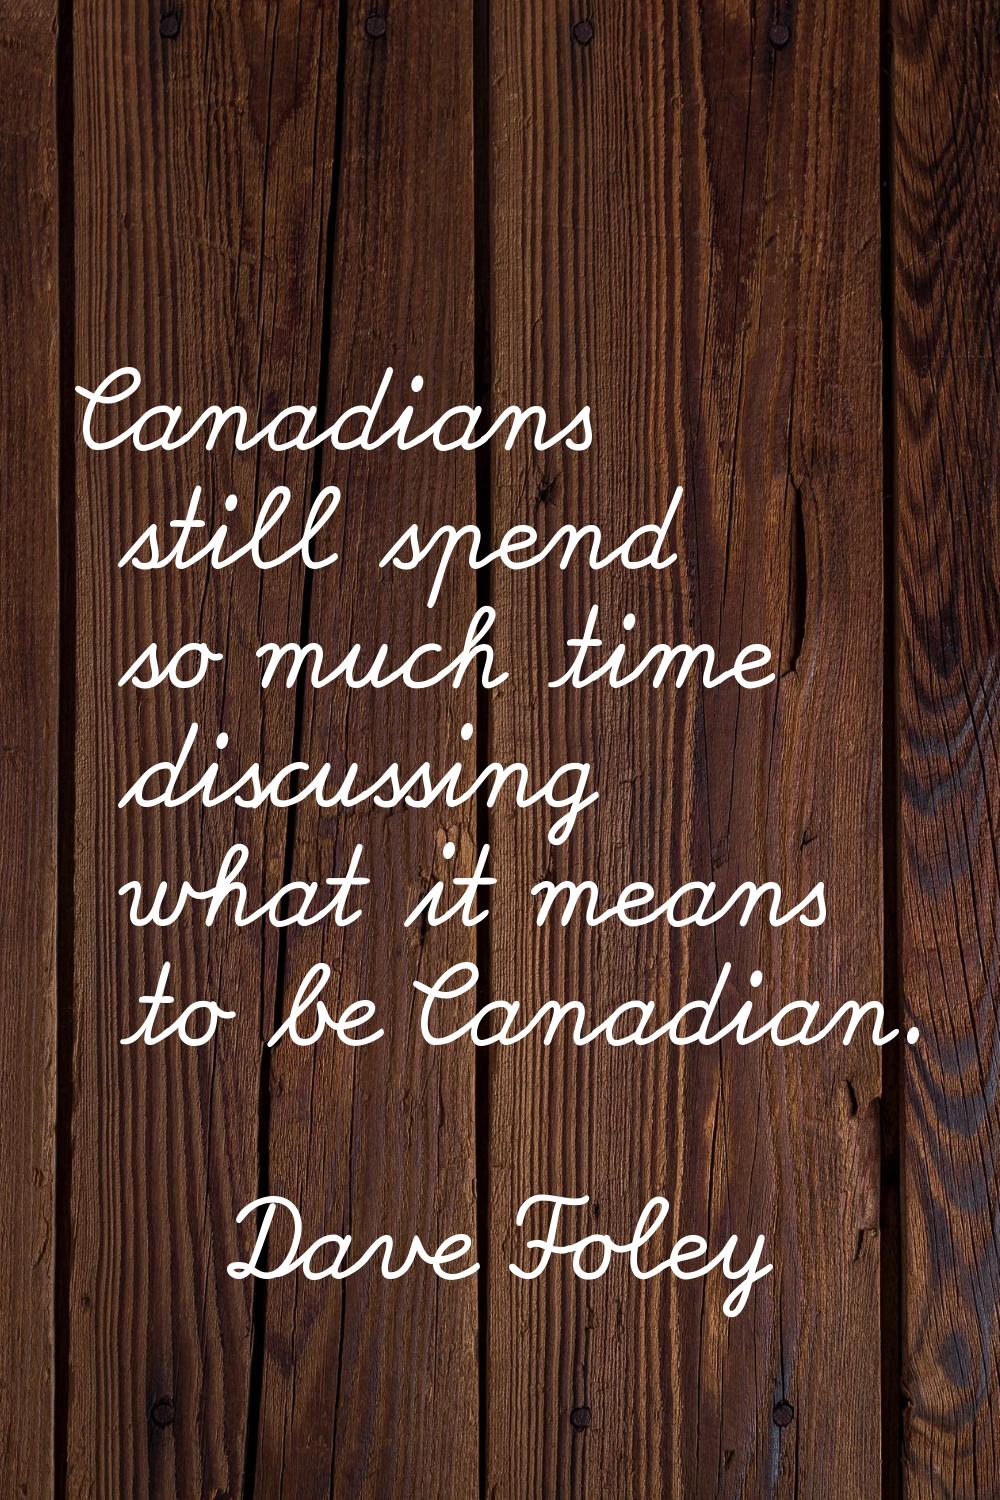 Canadians still spend so much time discussing what it means to be Canadian.